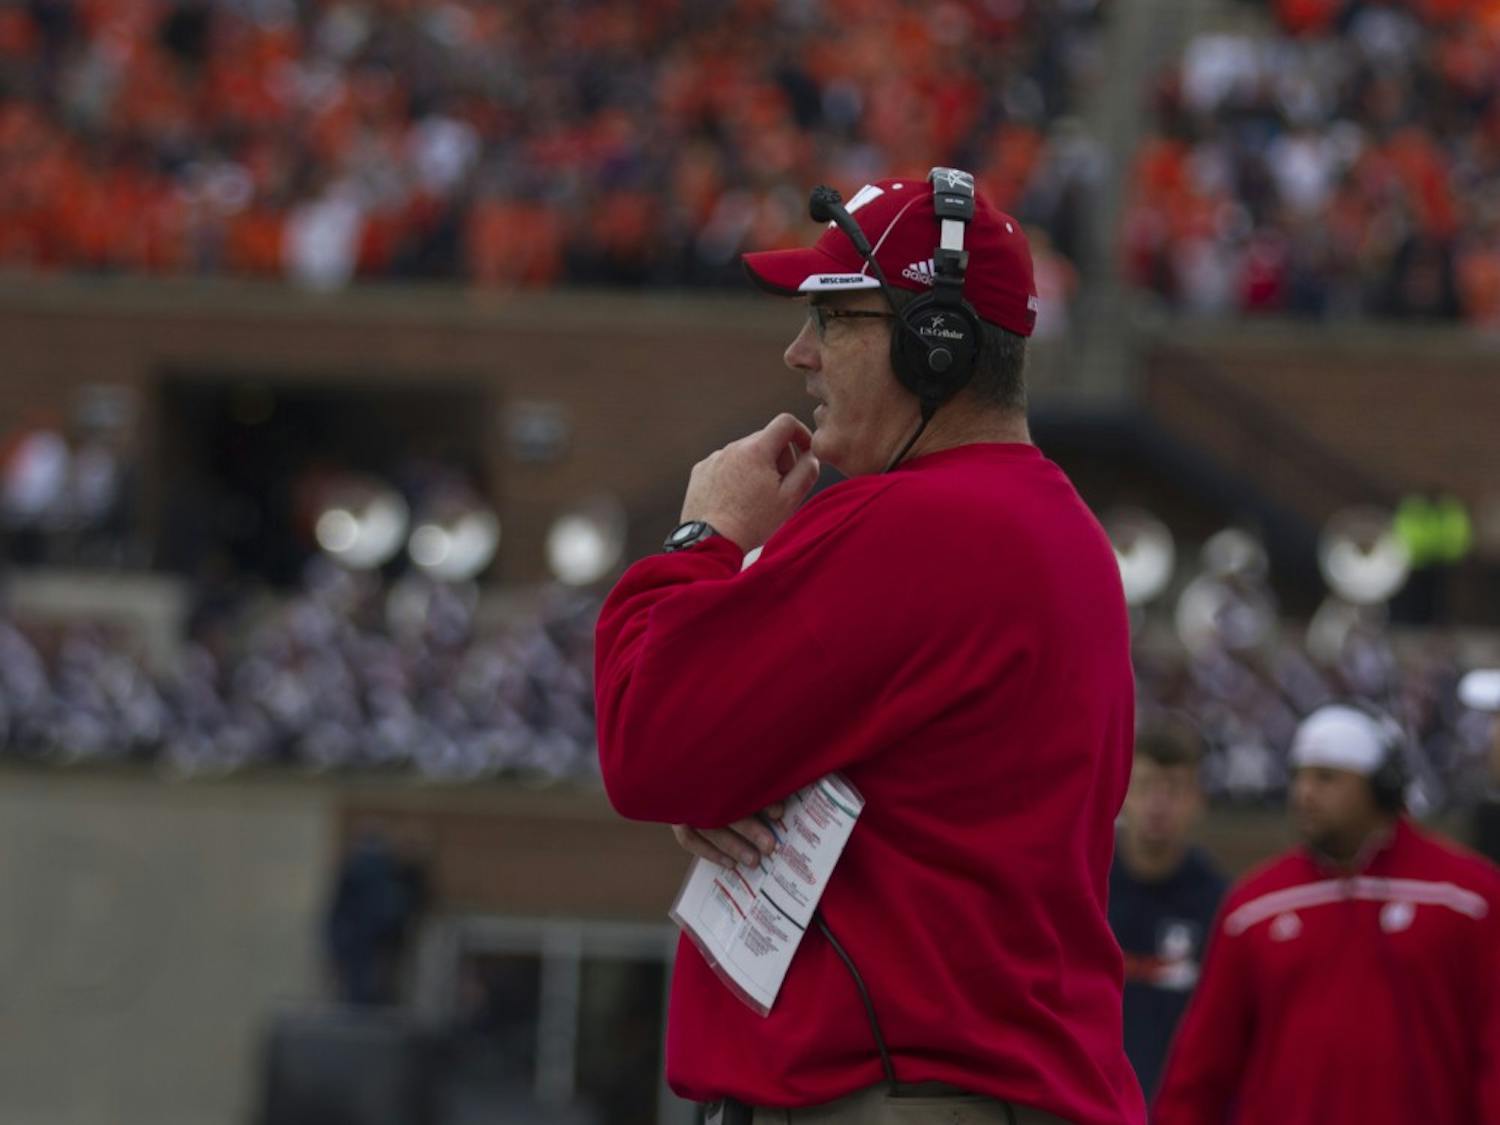 Head coach Paul Chryst revamped what had become a boring and predictable offense this summer, and the early results are paying off big